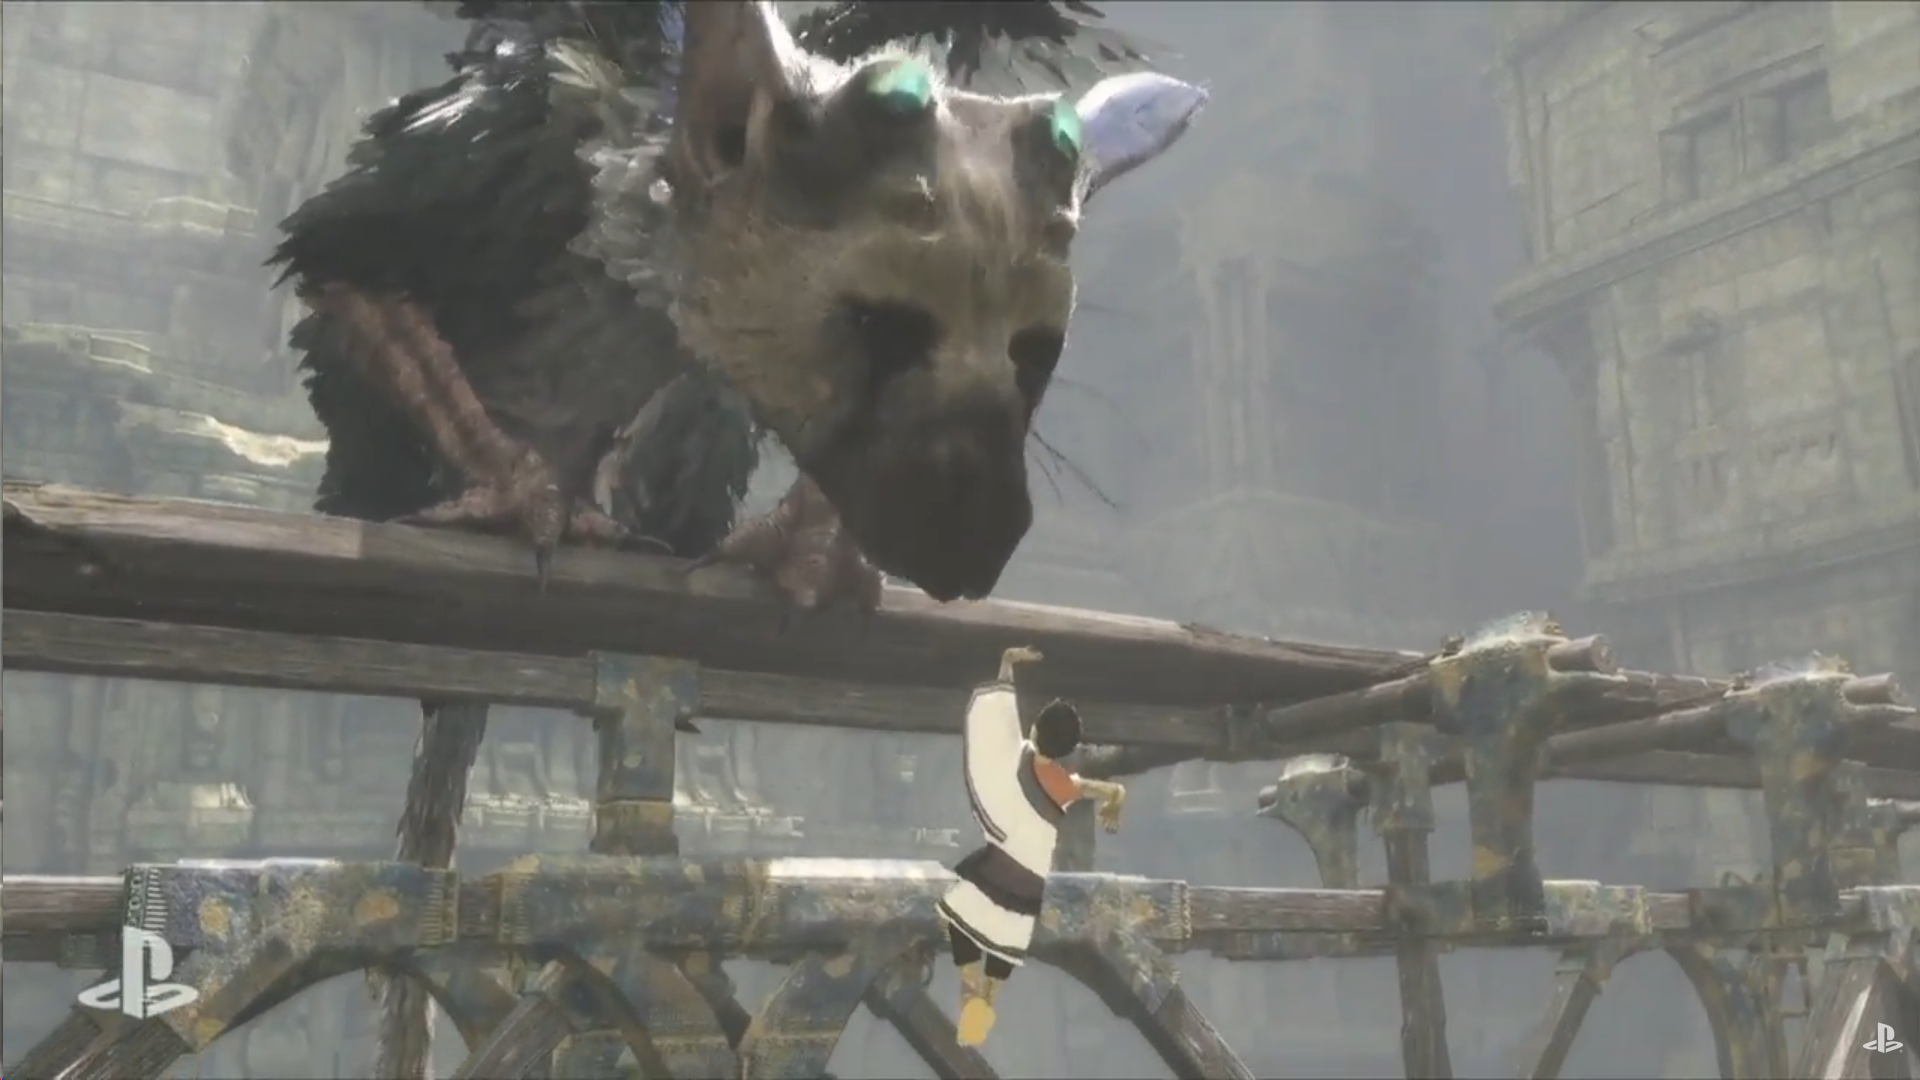 The Last Guardian Finally Coming Out in 2016, Gameplay Trailer Released